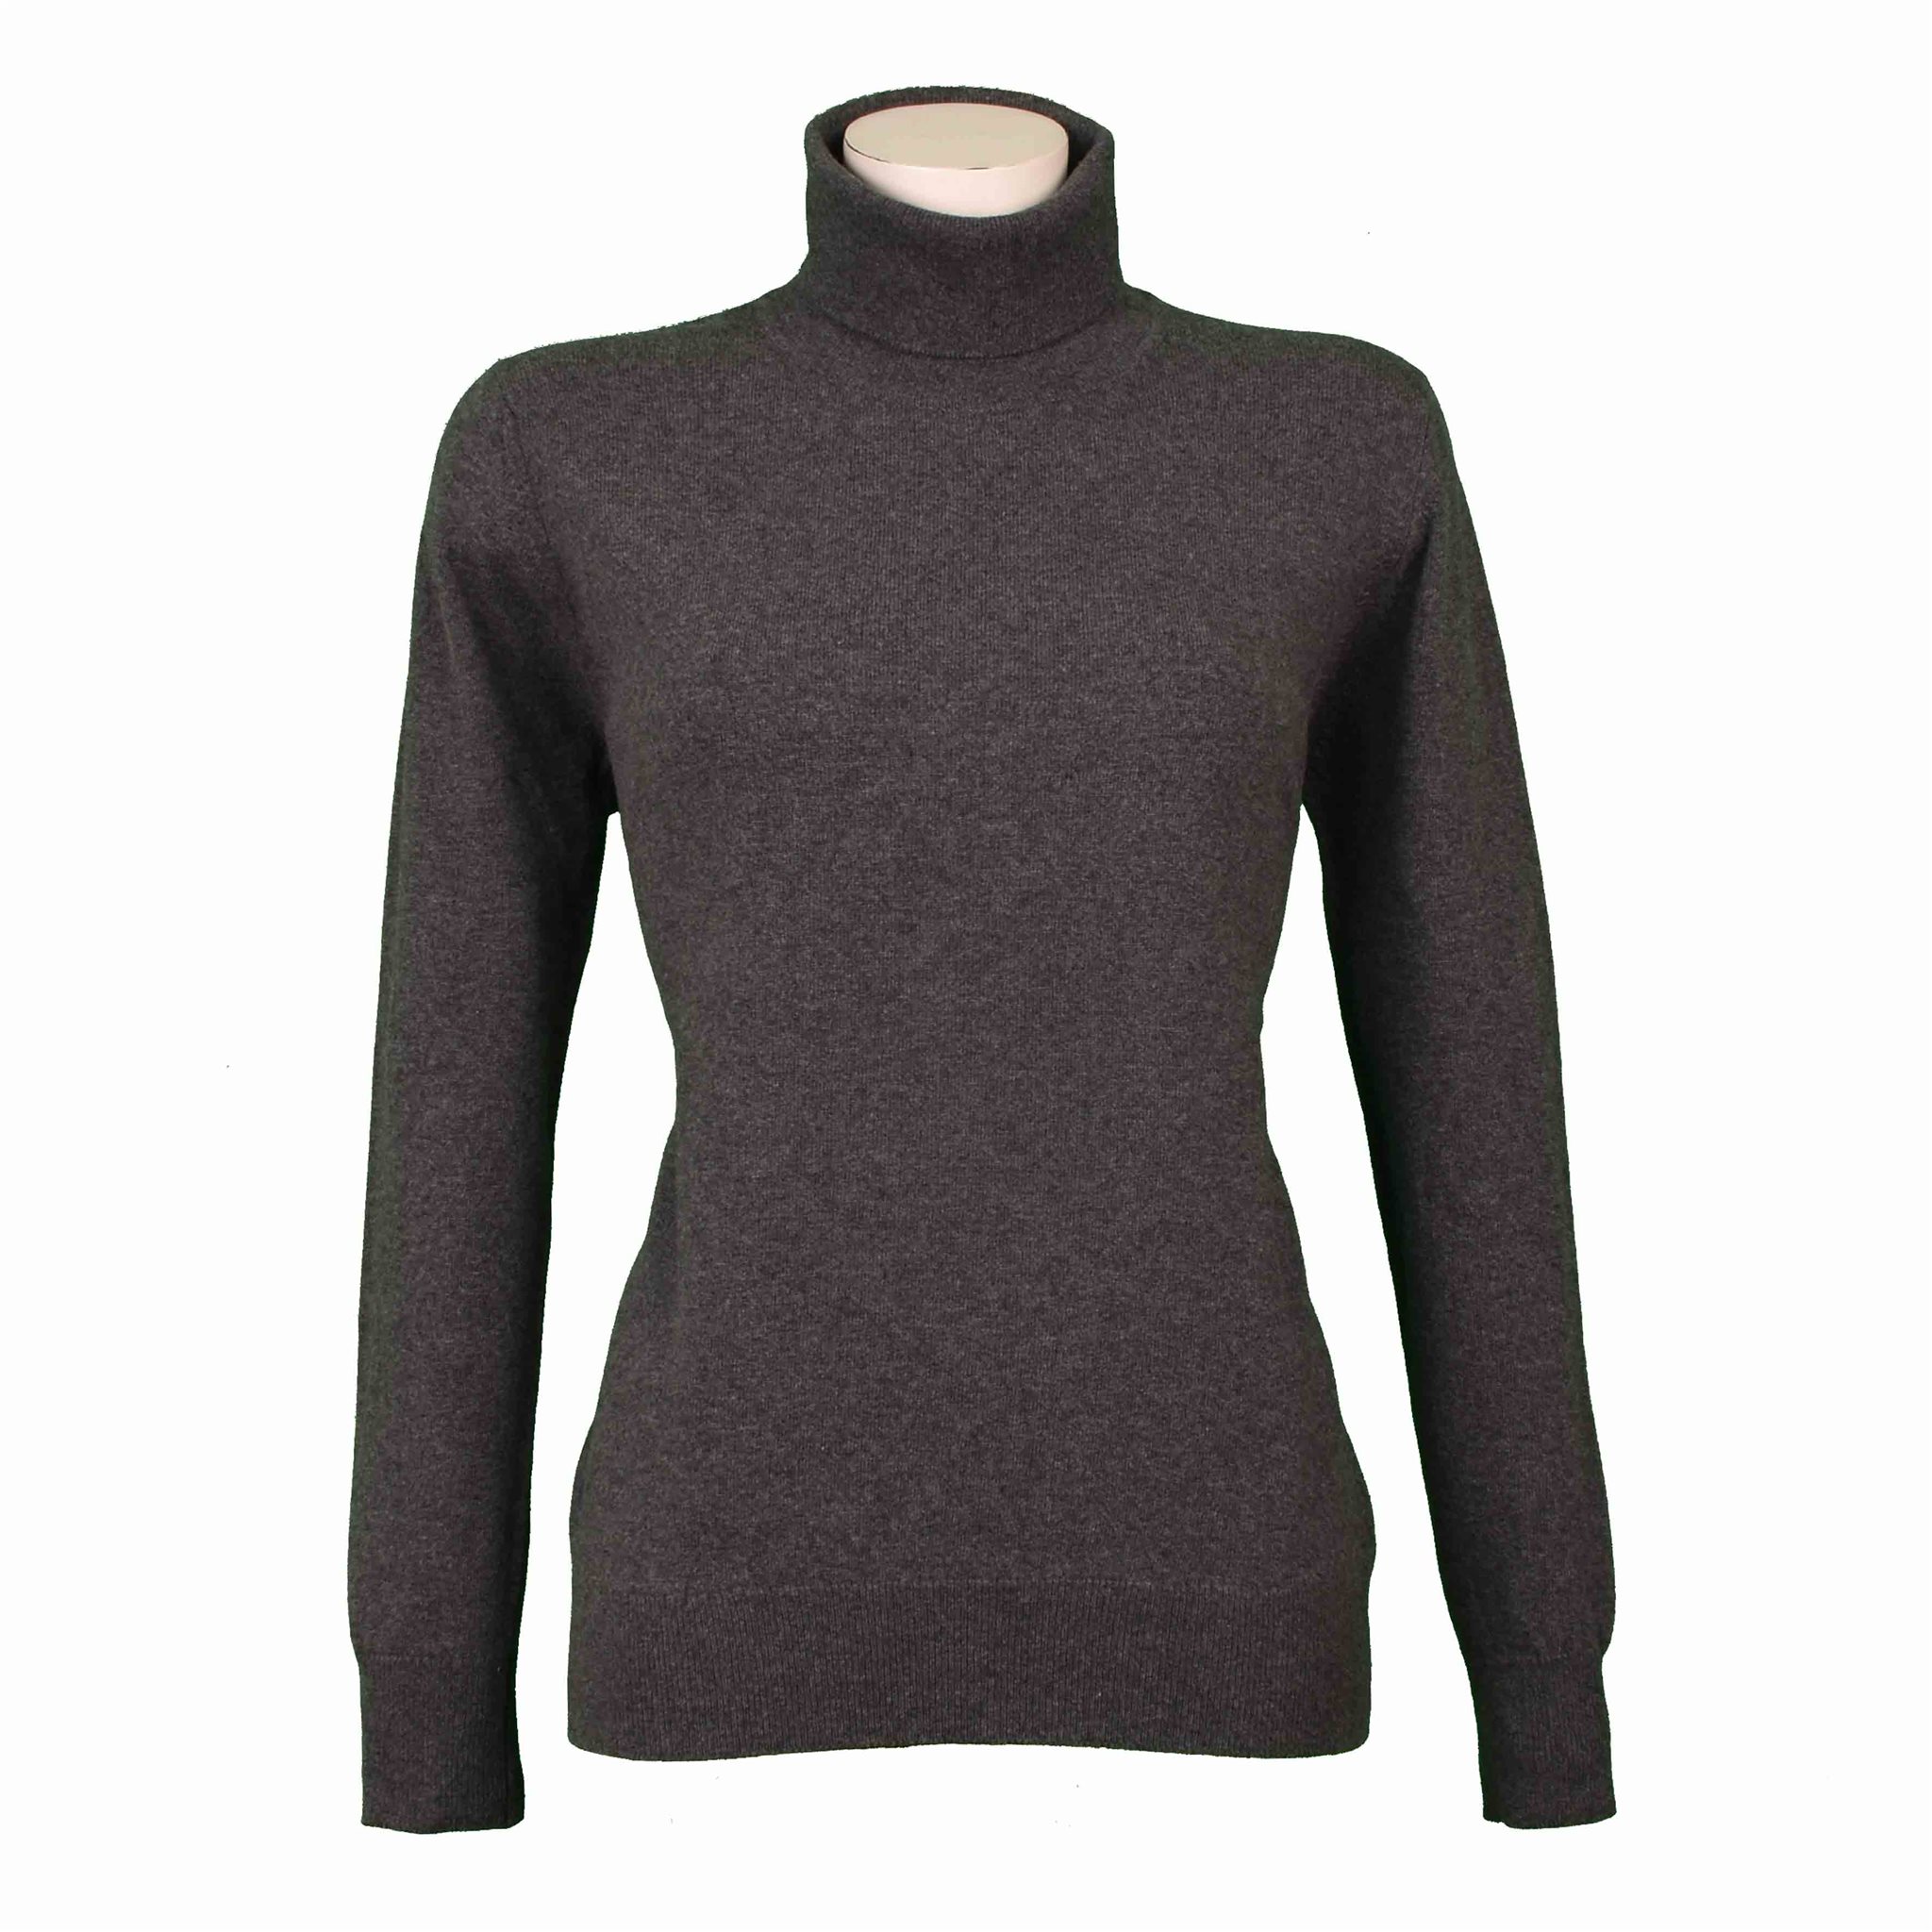 ROLL NECK SWEATER GISELLE WILLIAM LOCKIE WOMAN